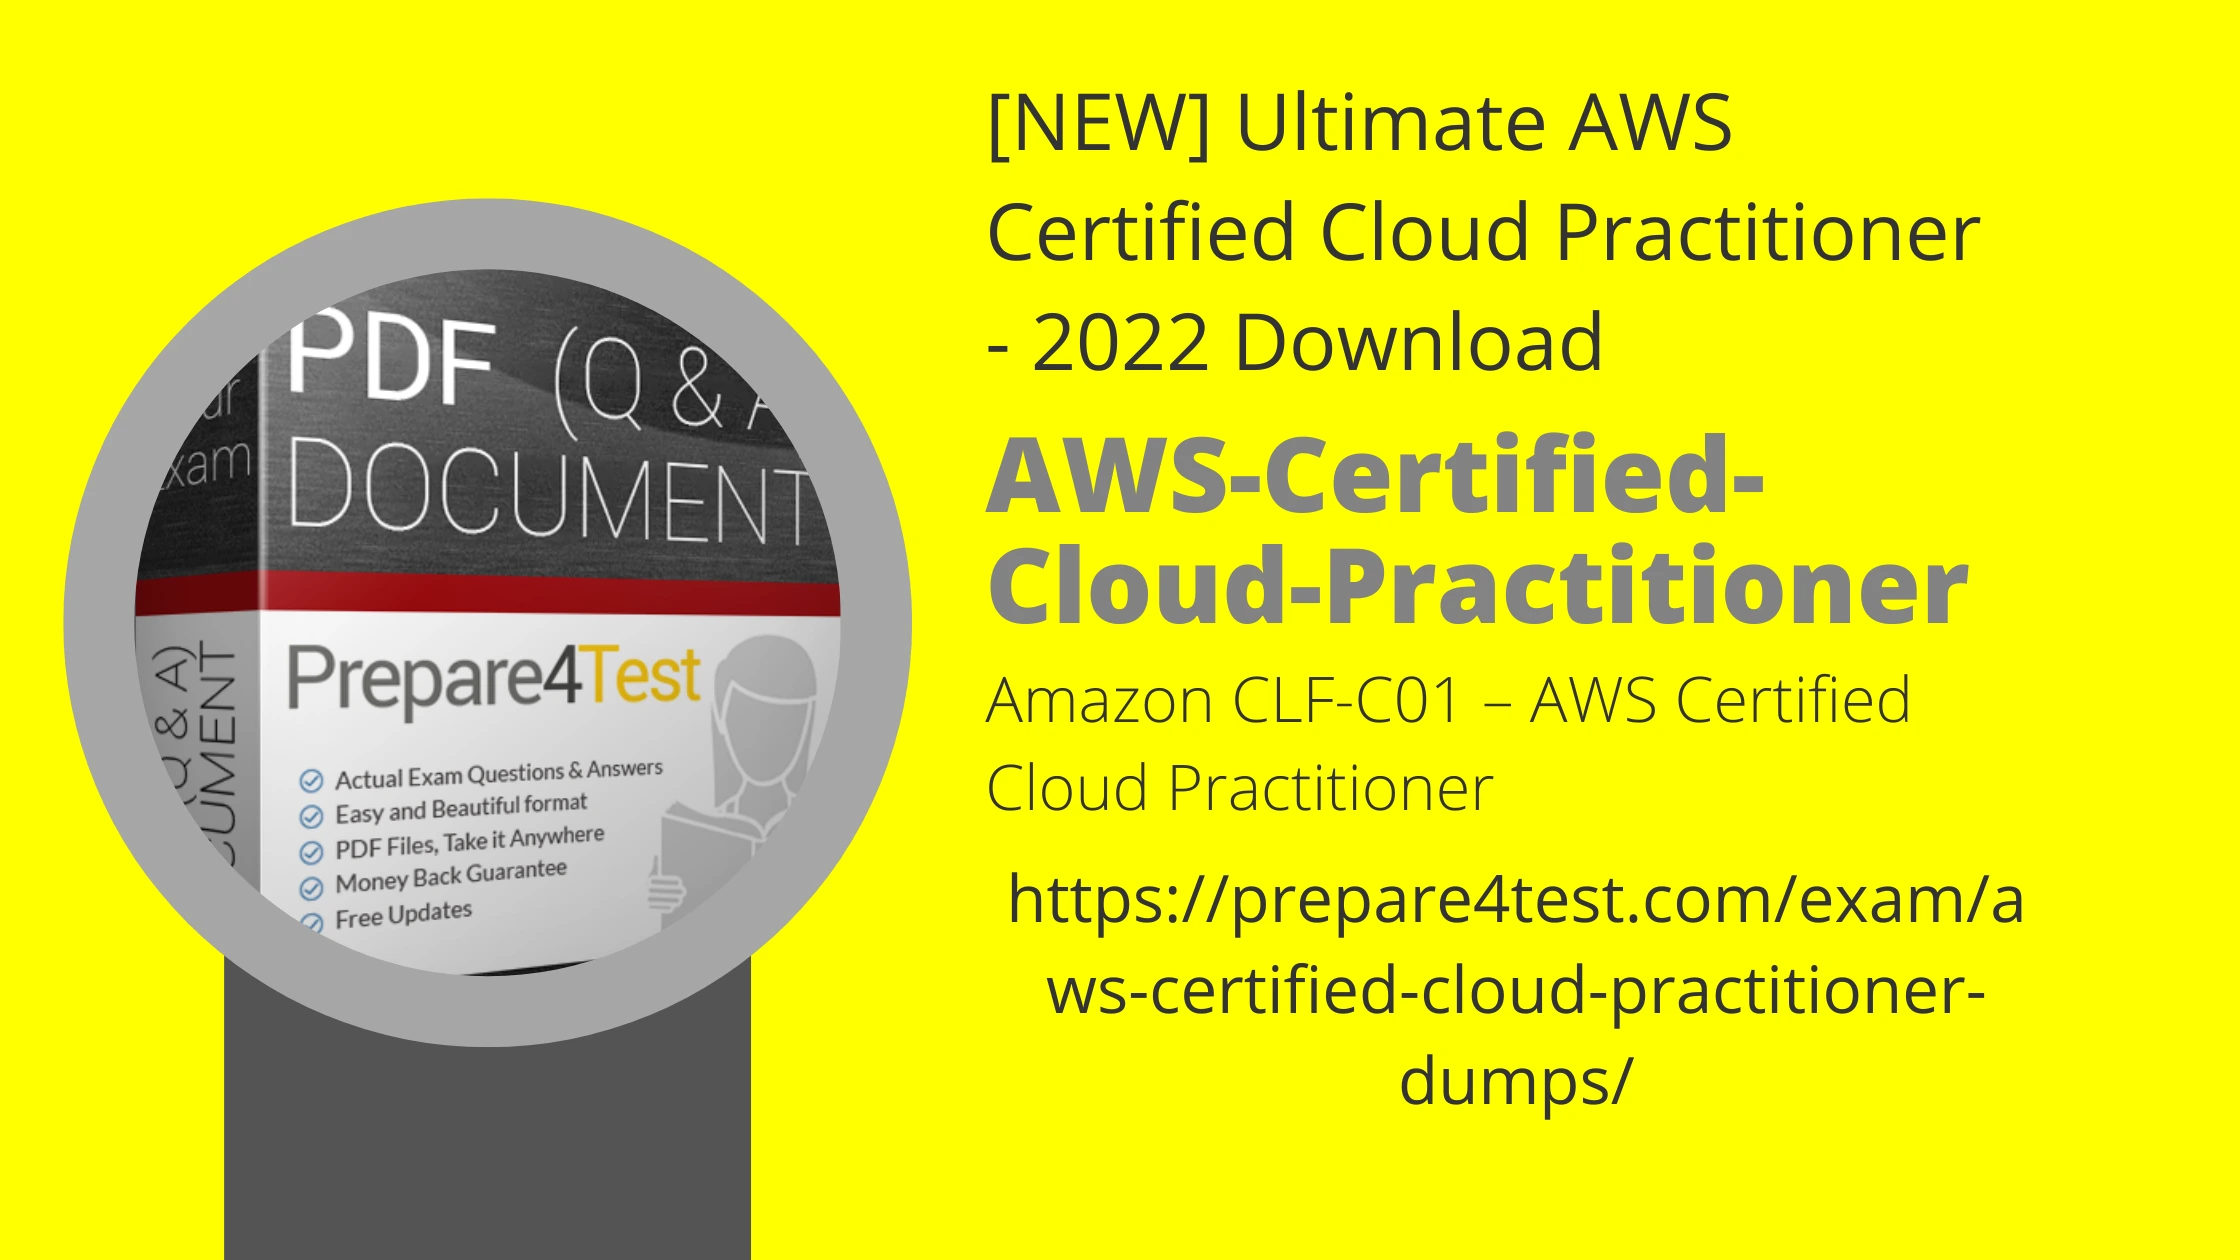 [NEW] Ultimate AWS Certified Cloud Practitioner - 2022 Download promotion